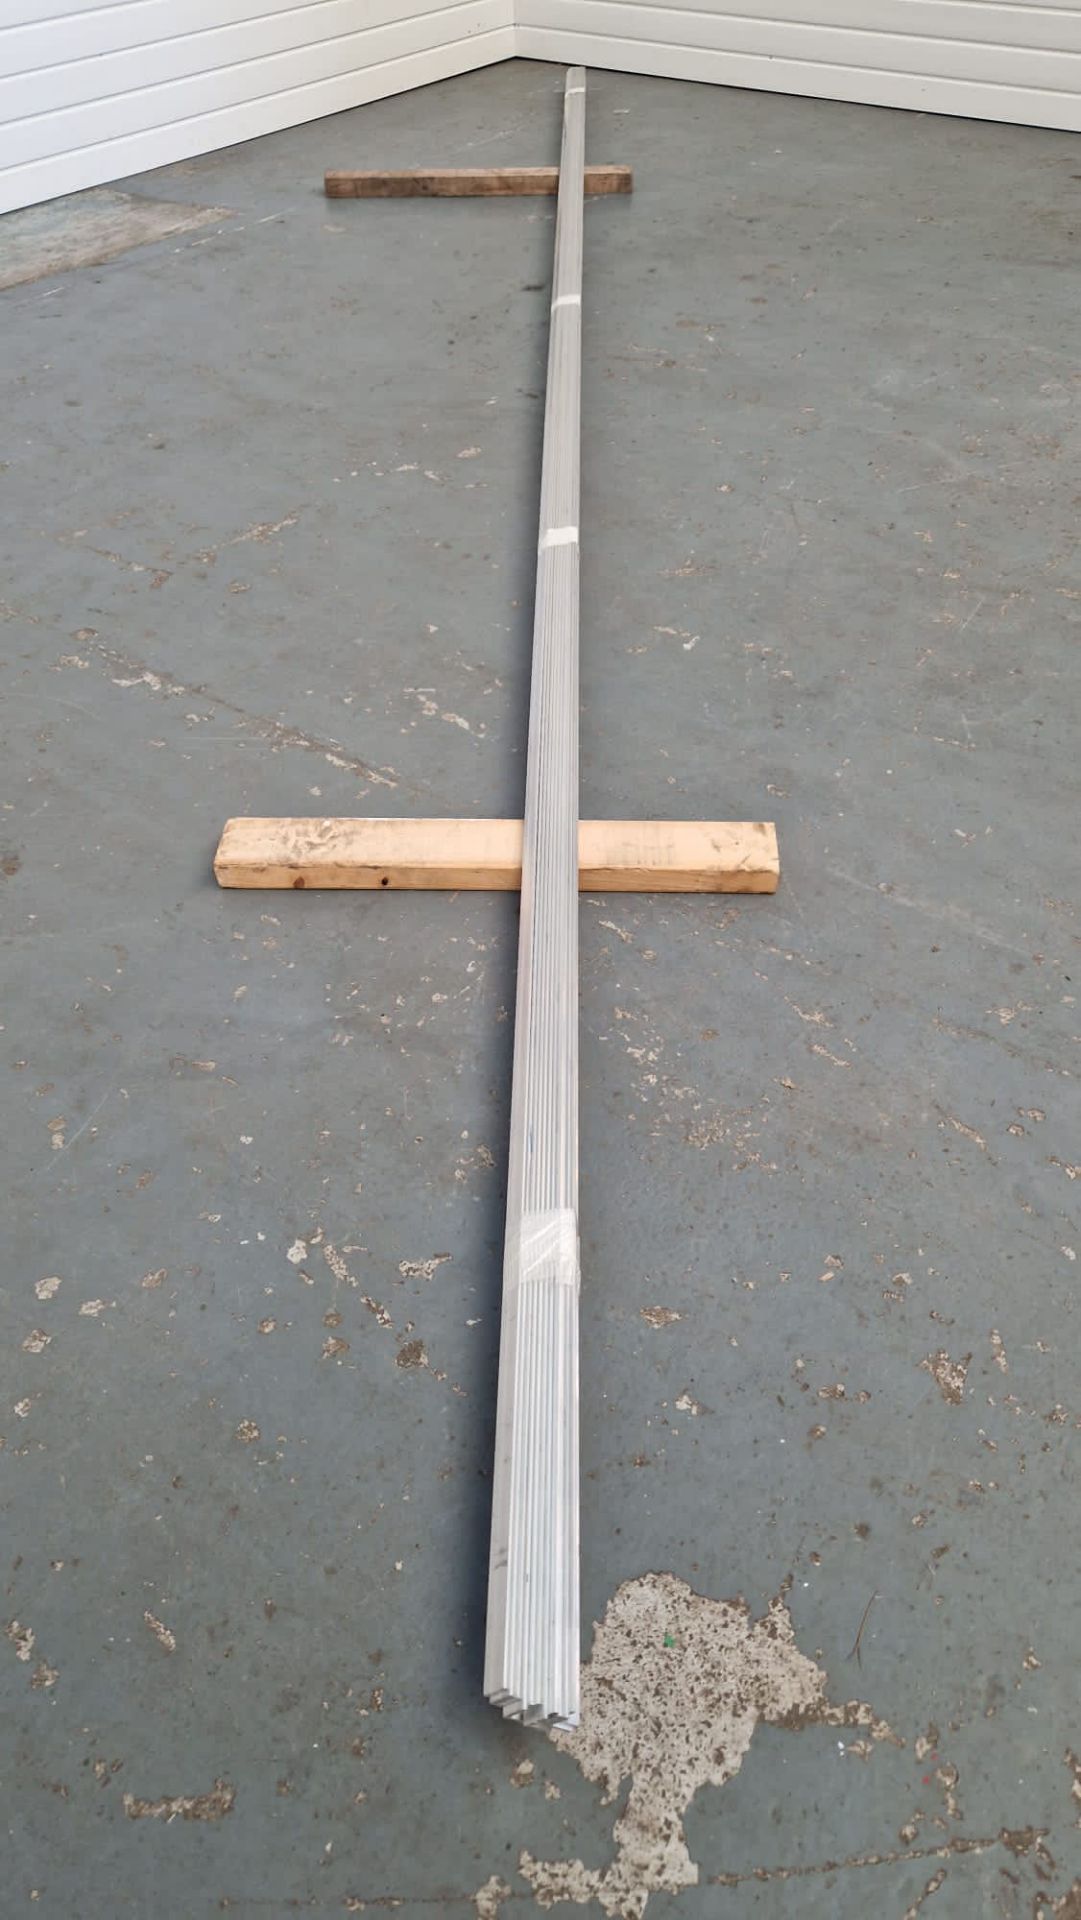 11 x Lengths of Aluminium 'L' Shape Angle Plate. Length: 5000mm. Dimensions: 22 x 22 x 3mm. - Image 3 of 7